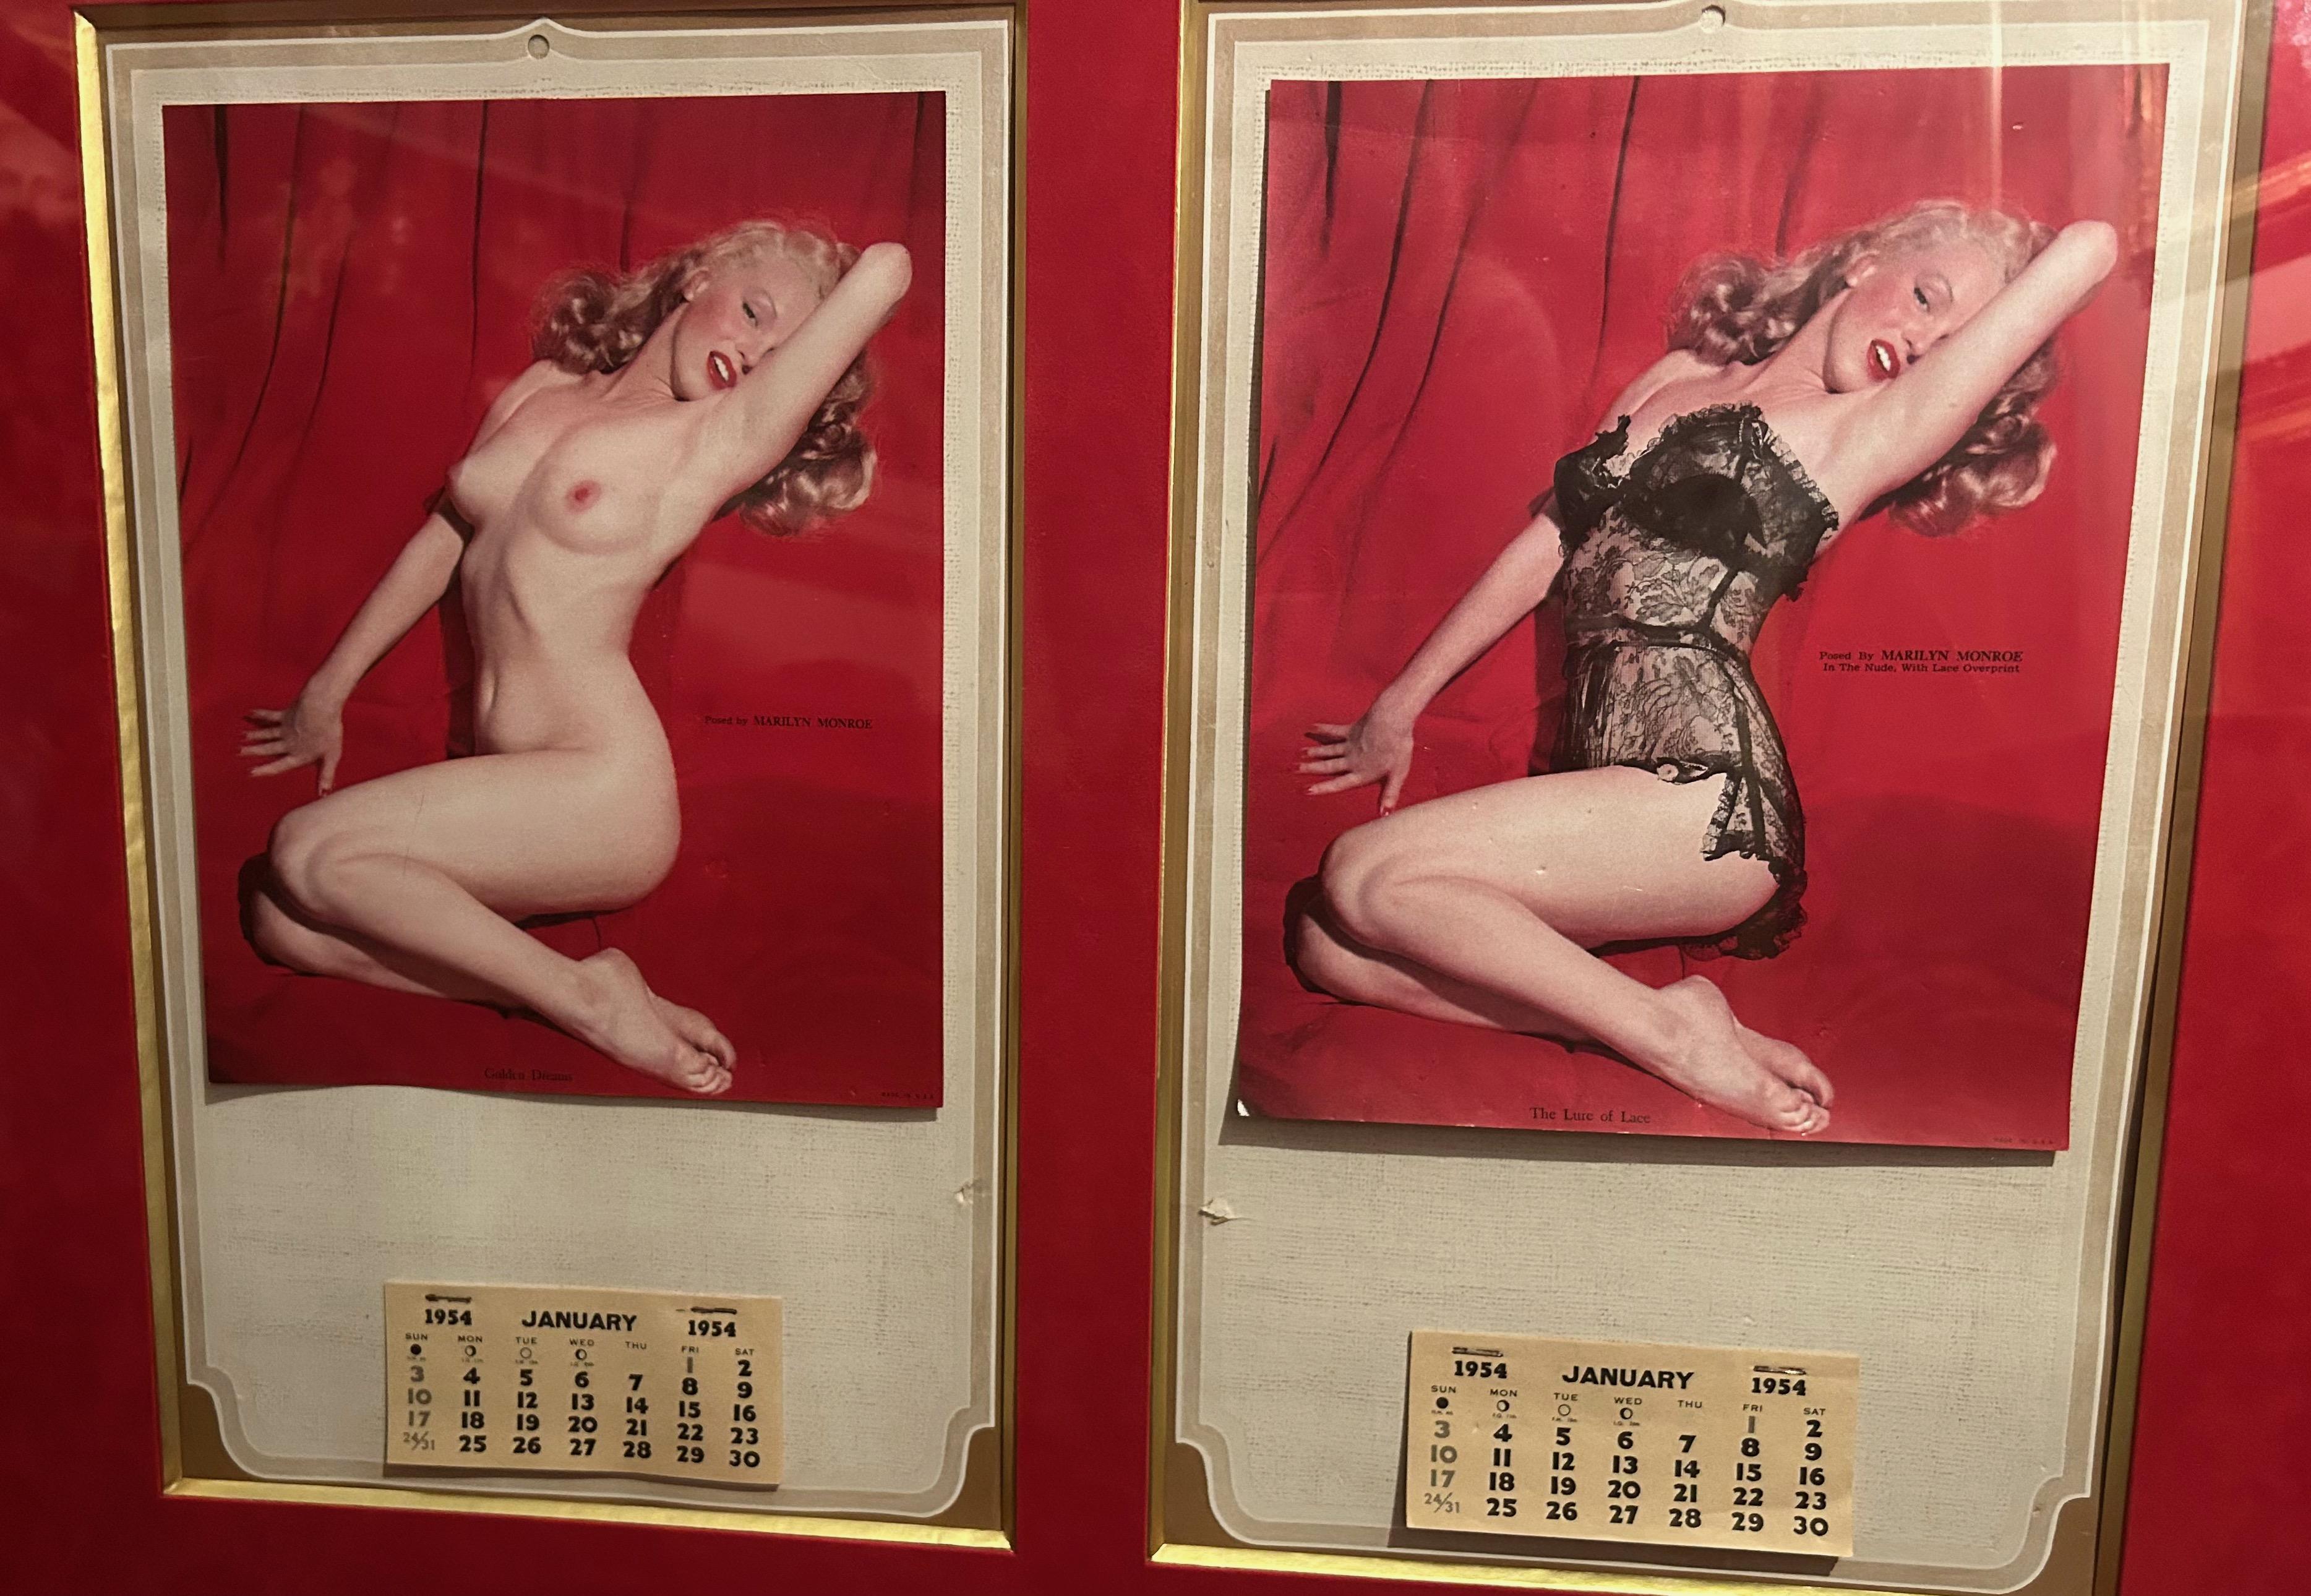 Marilyn Monroe Calendar 1954
Two calendar pages from 1954 with day planners of Marilyn Monroe in nude posing and then dressed in fine lingerie using a special device. 
One bears the words 